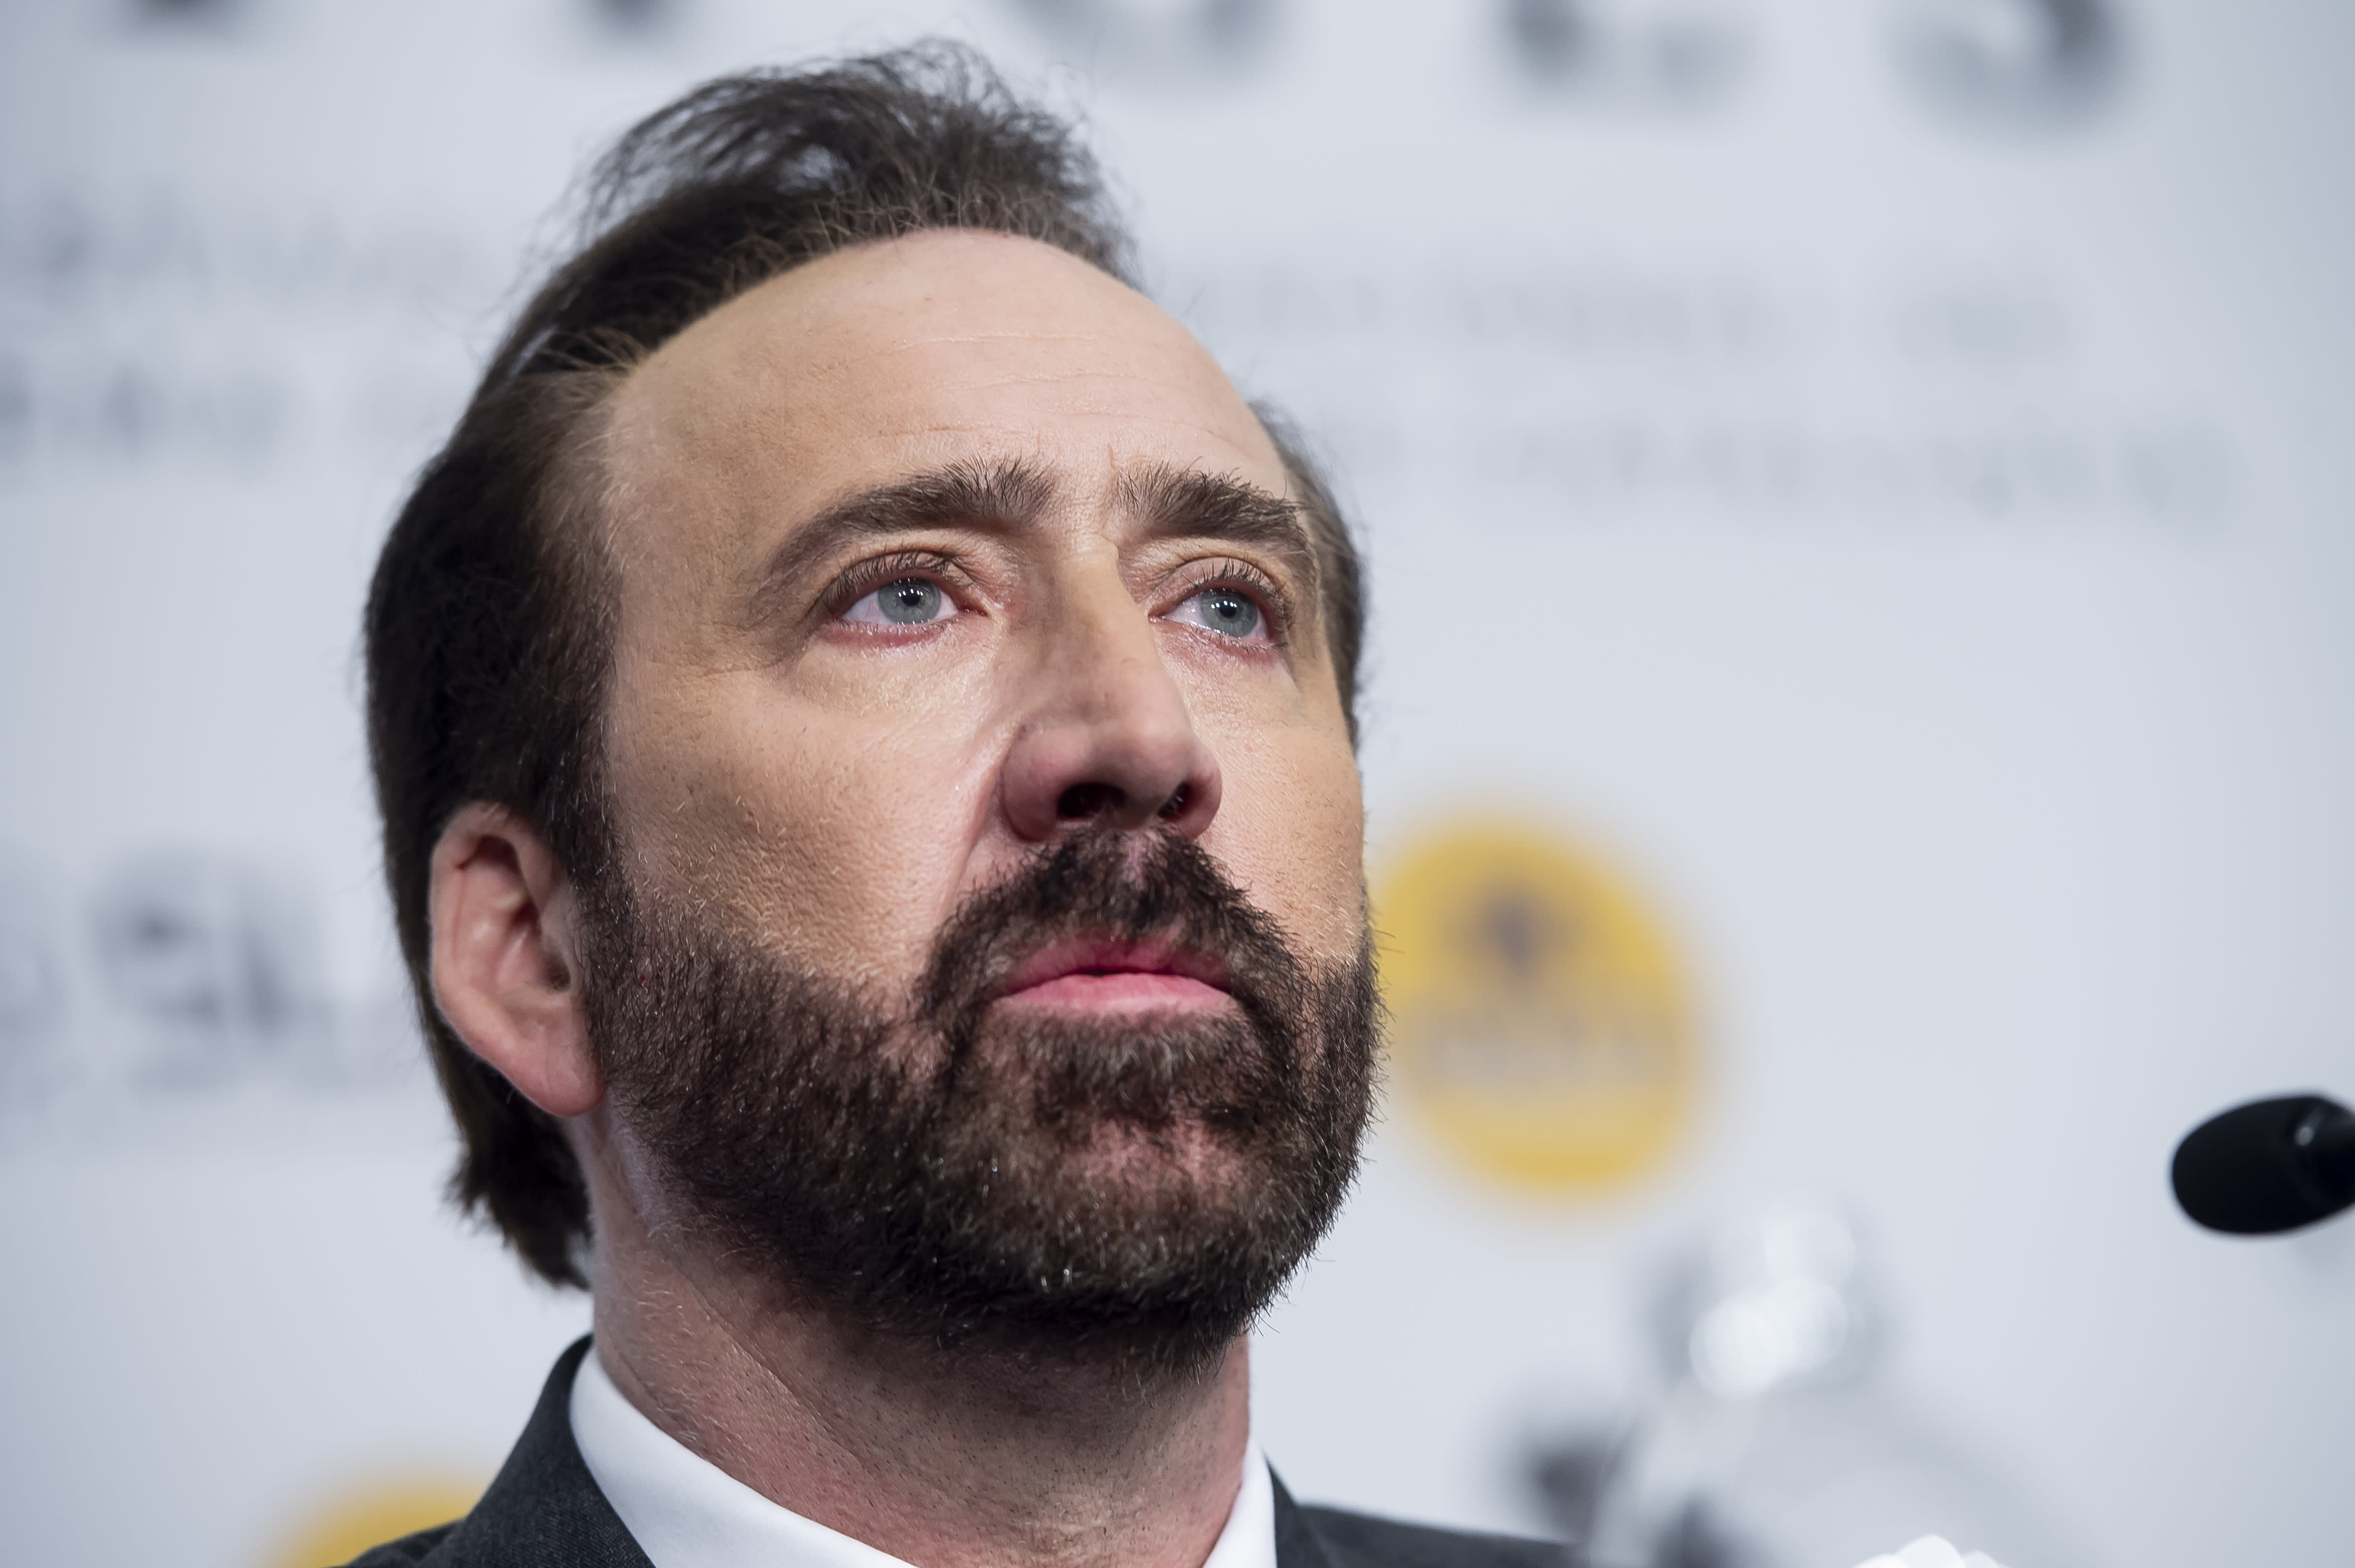 Classic Riches To Rags story - Nicolas Cage